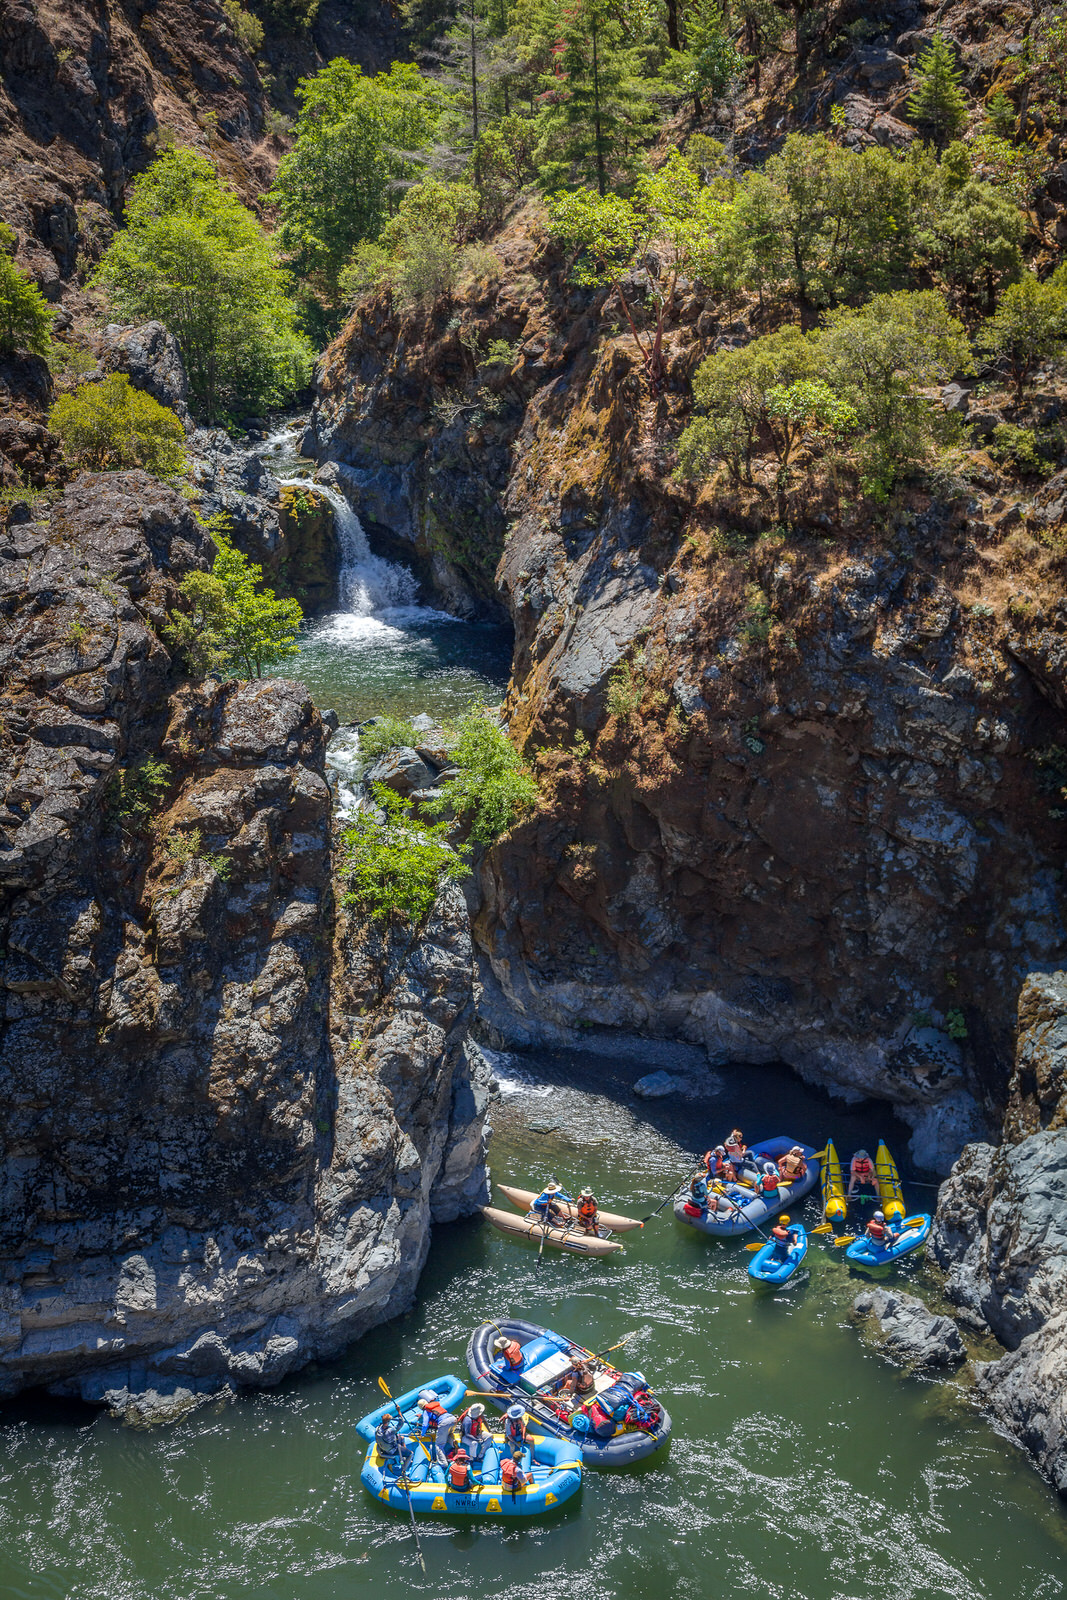  Rafters at Stair Creek Falls on the Rogue River 